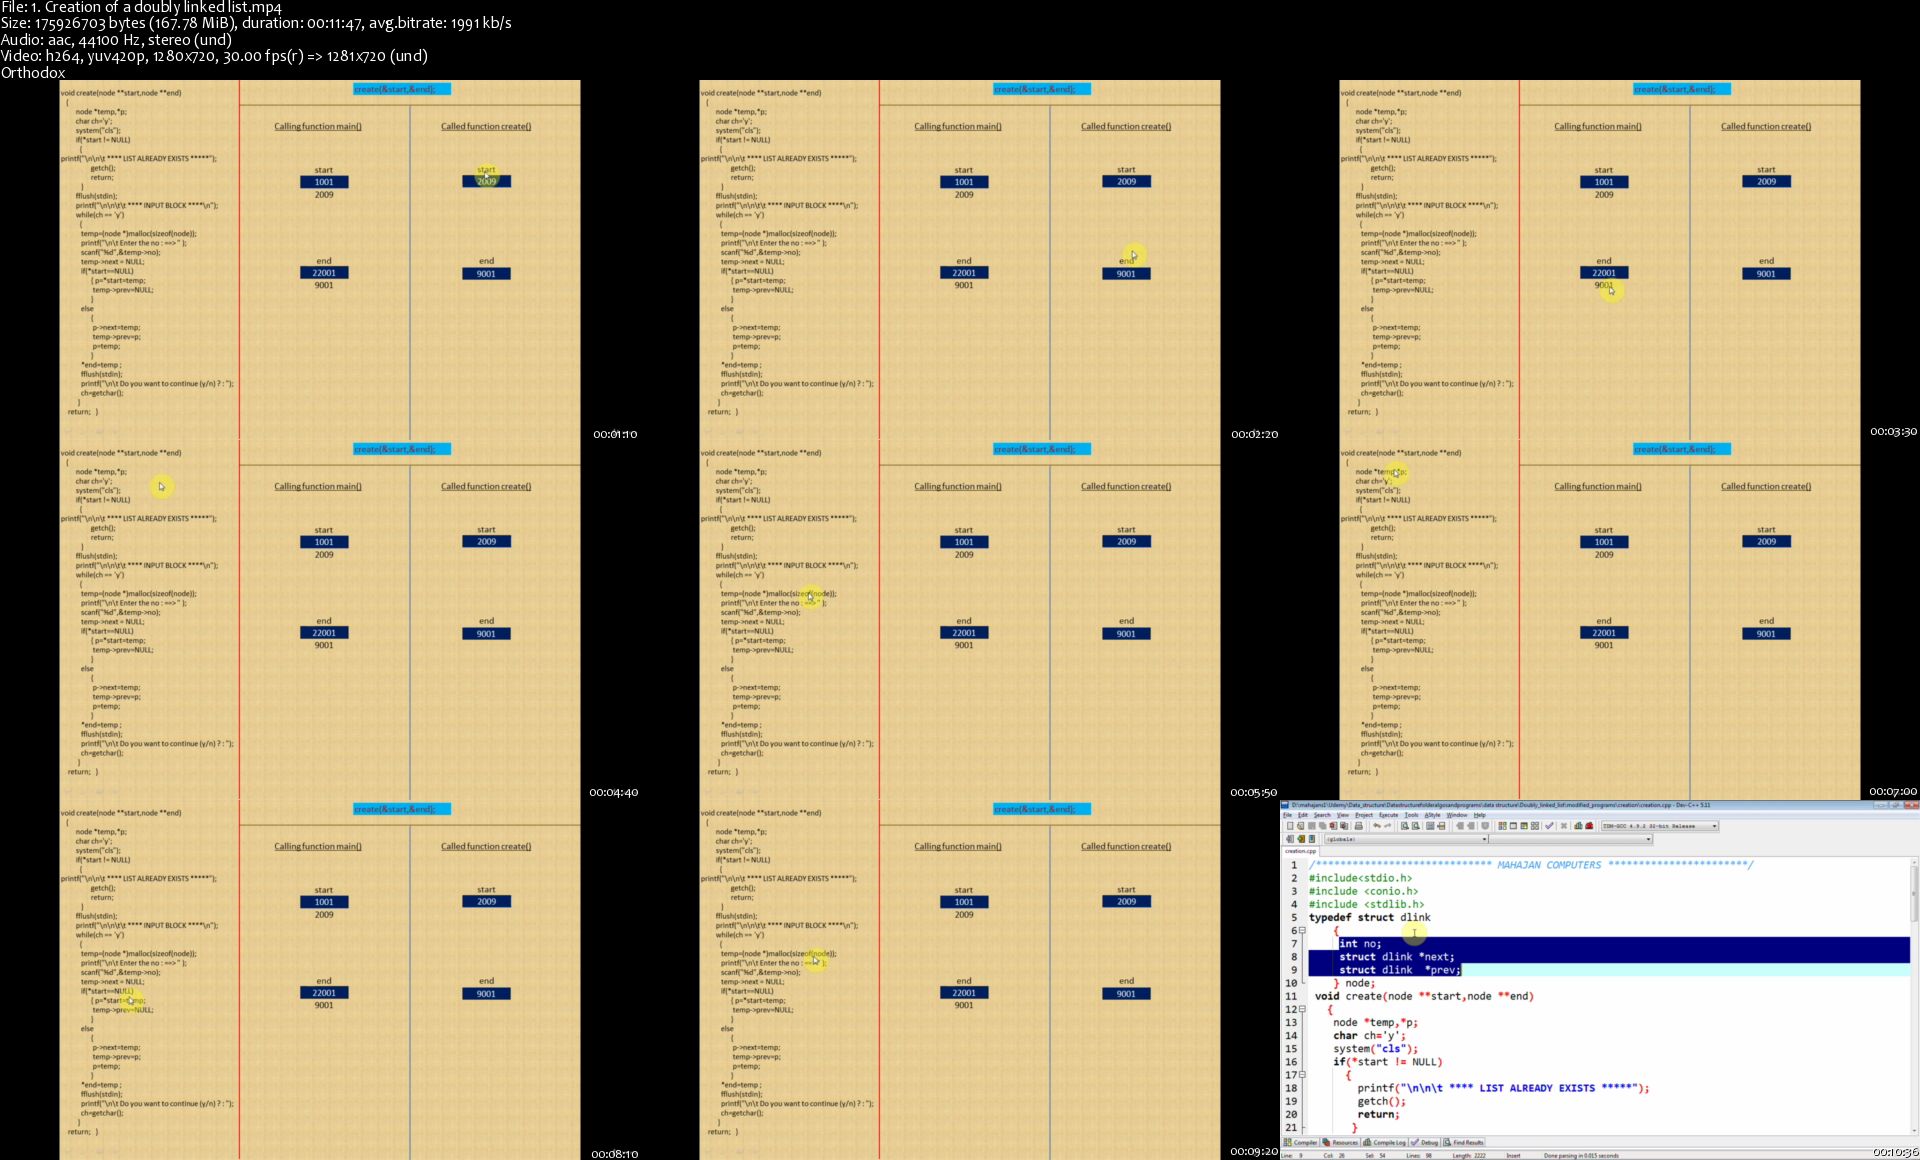 1-Creation-of-a-doubly-linked-list-s.jpg